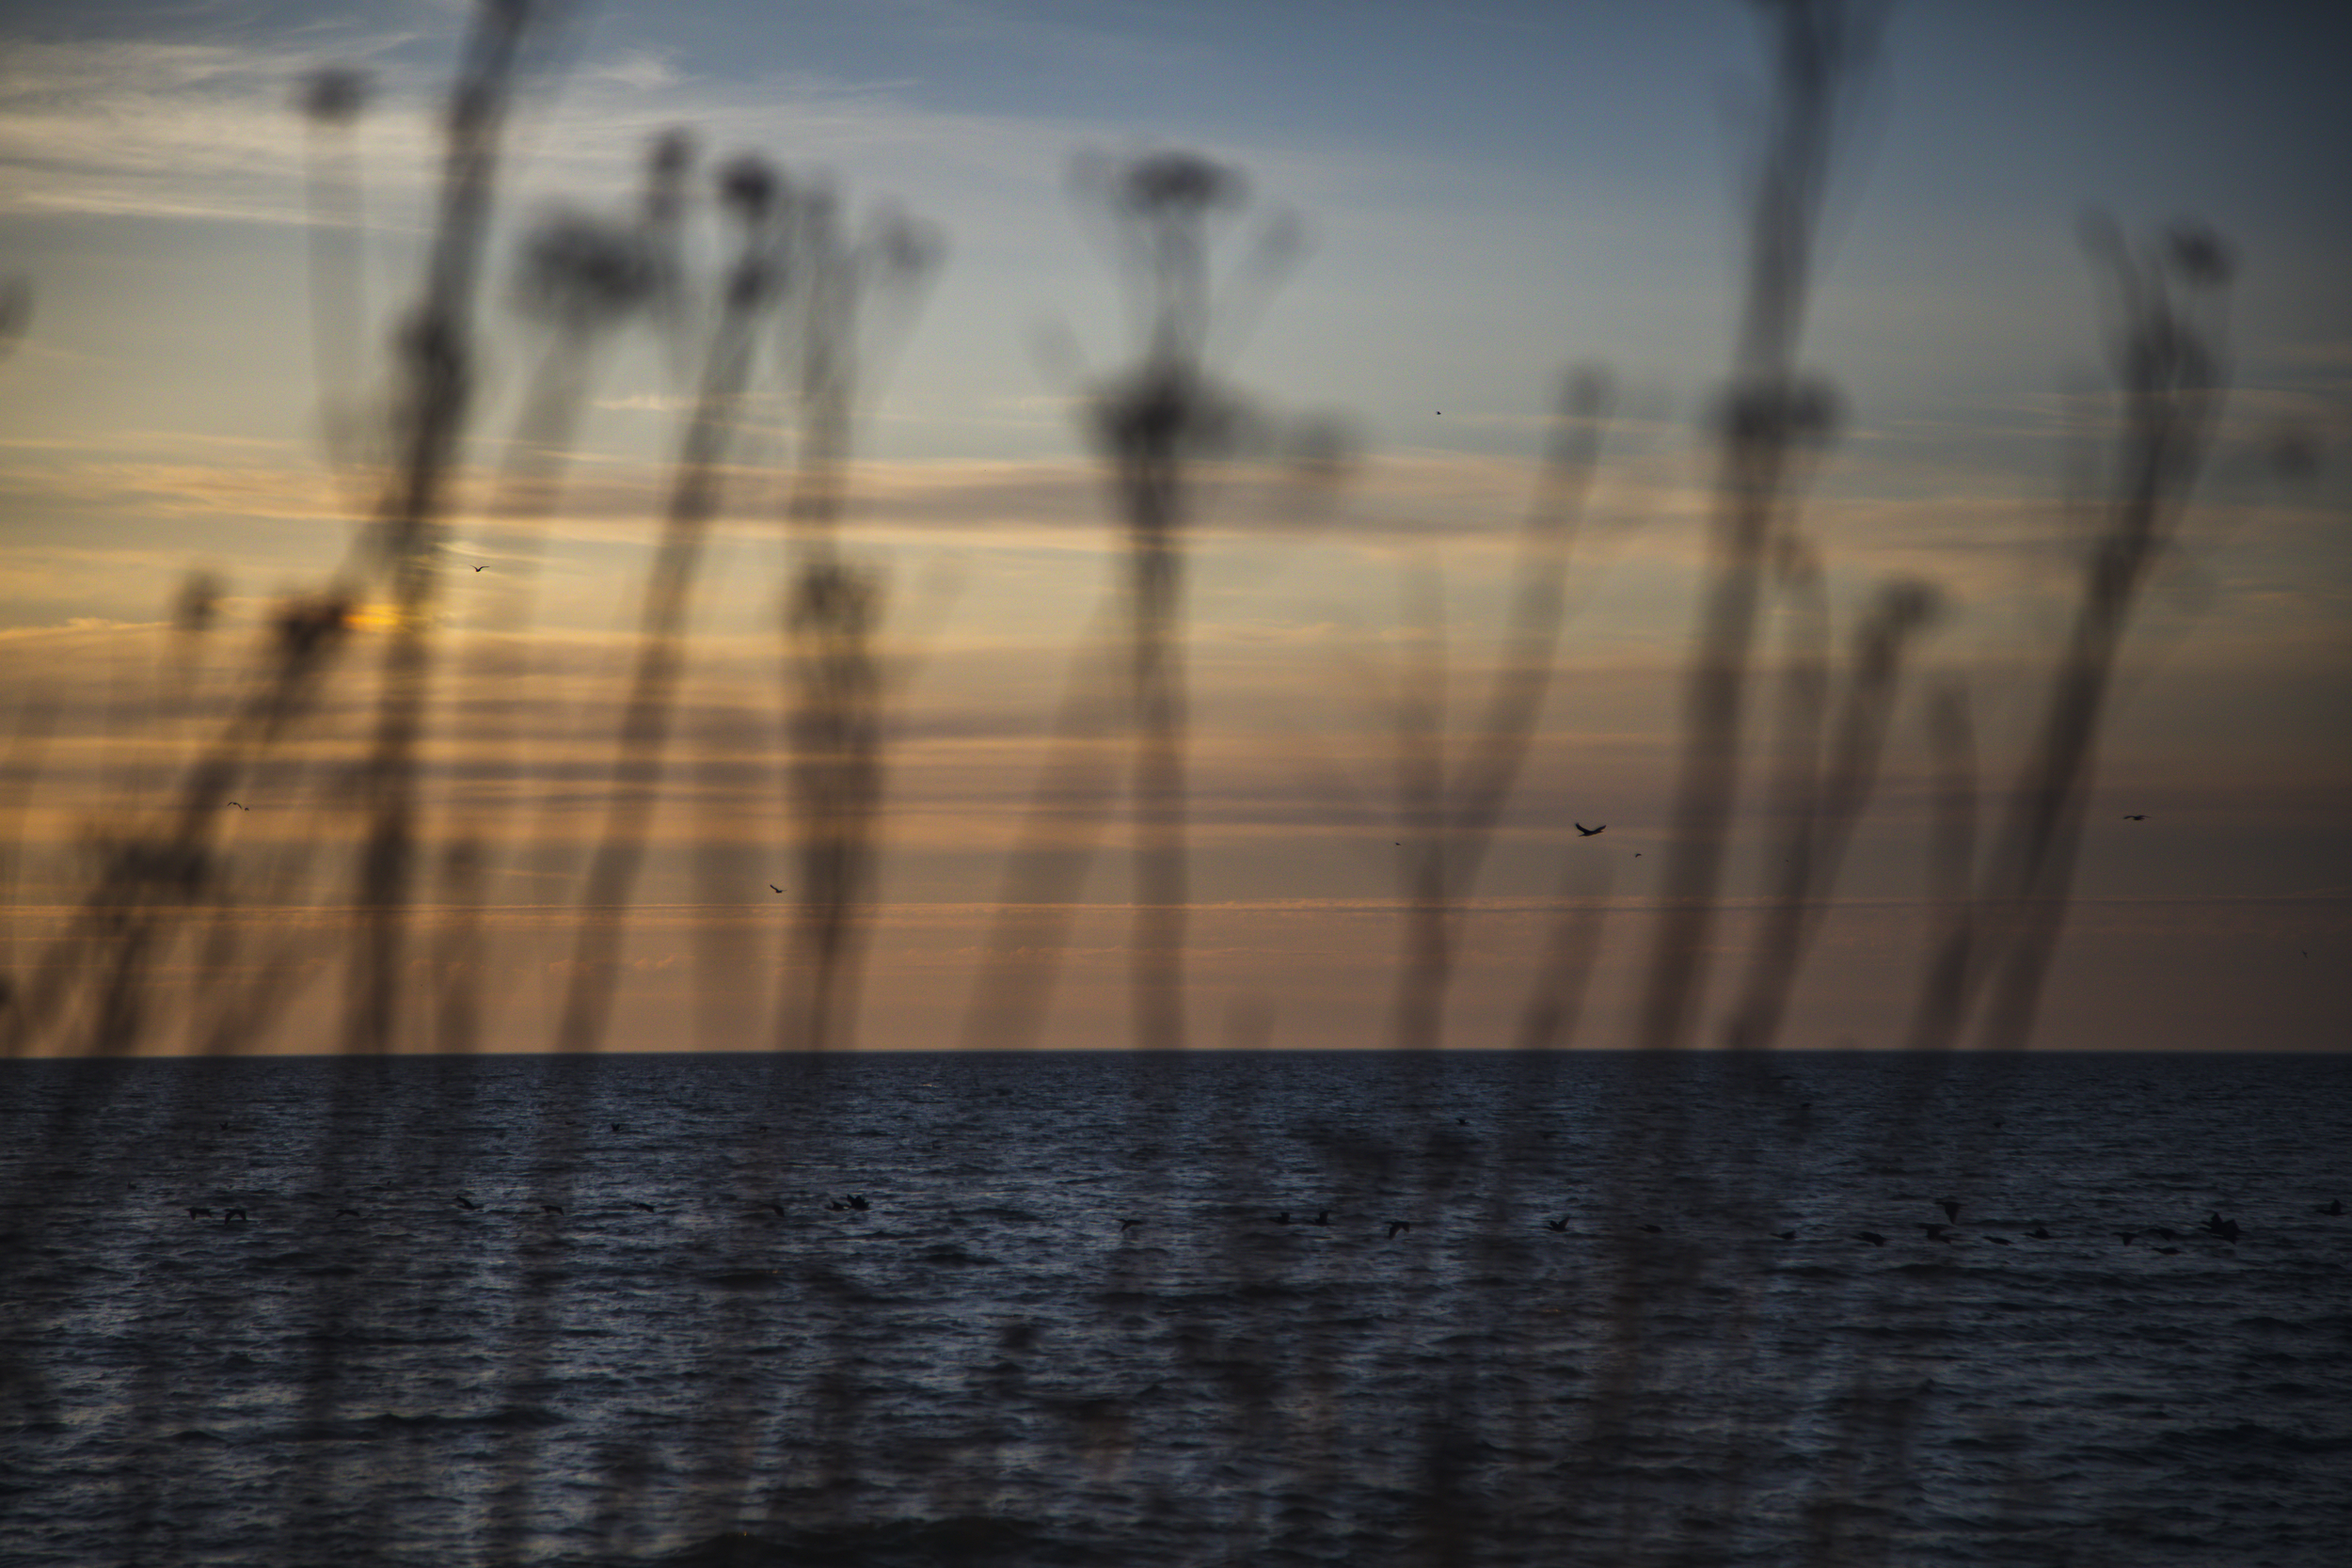 Sunrise over Lake Ontario, seen through out-of-focus grasses at Tommy Thompson Park.